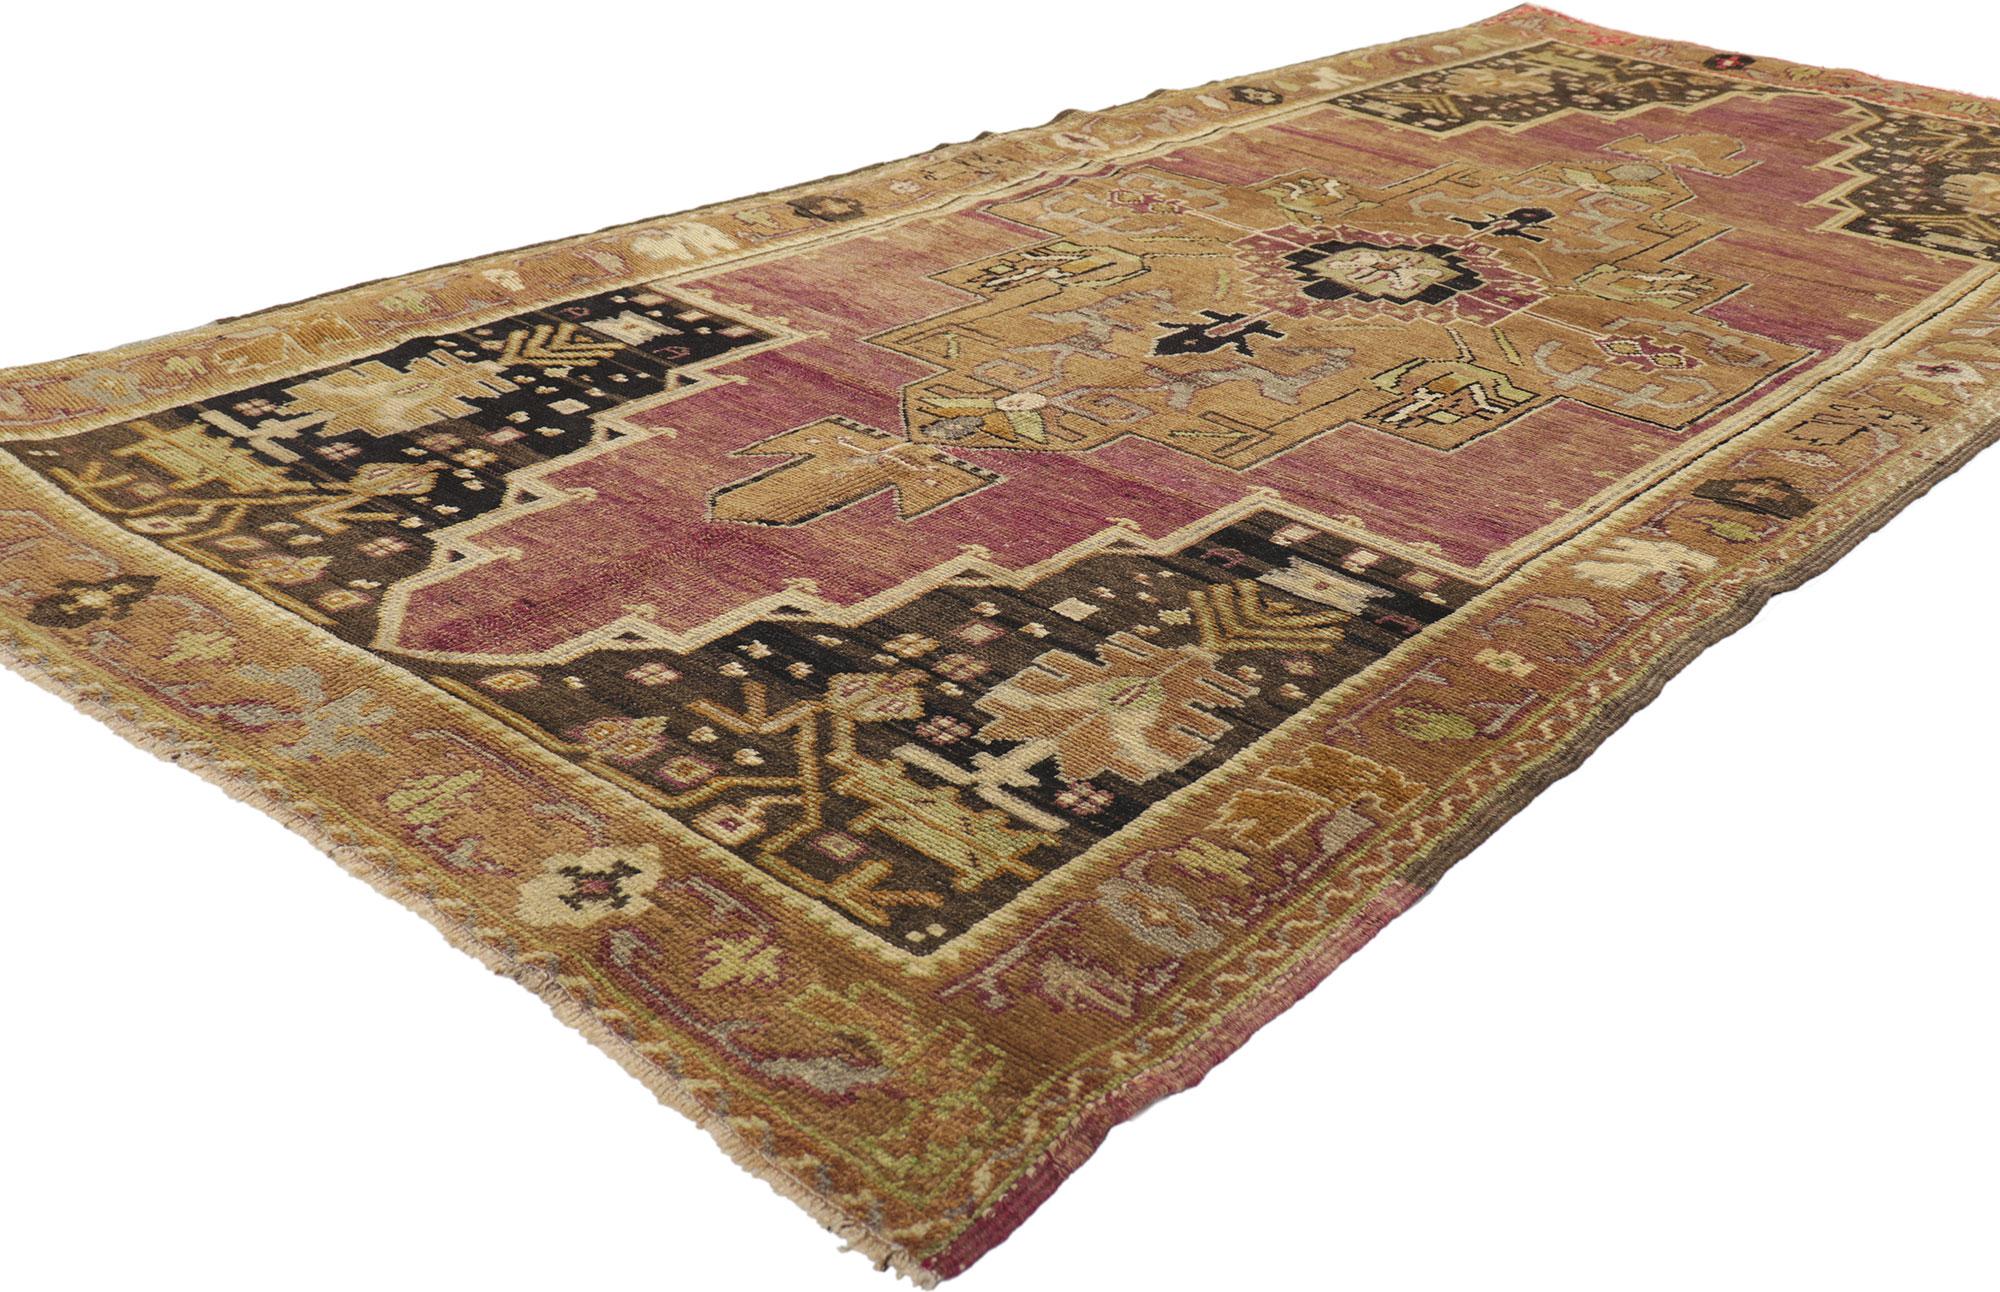 50291 Antique Turkish Oushak Rug, 03’08 x 08’02. This hand-knotted wool antique Turkish Oushak rug serves as a captivating testament to the rich culture of Anatolian history and tribal artistry. Its intricate design unfolds against a backdrop of